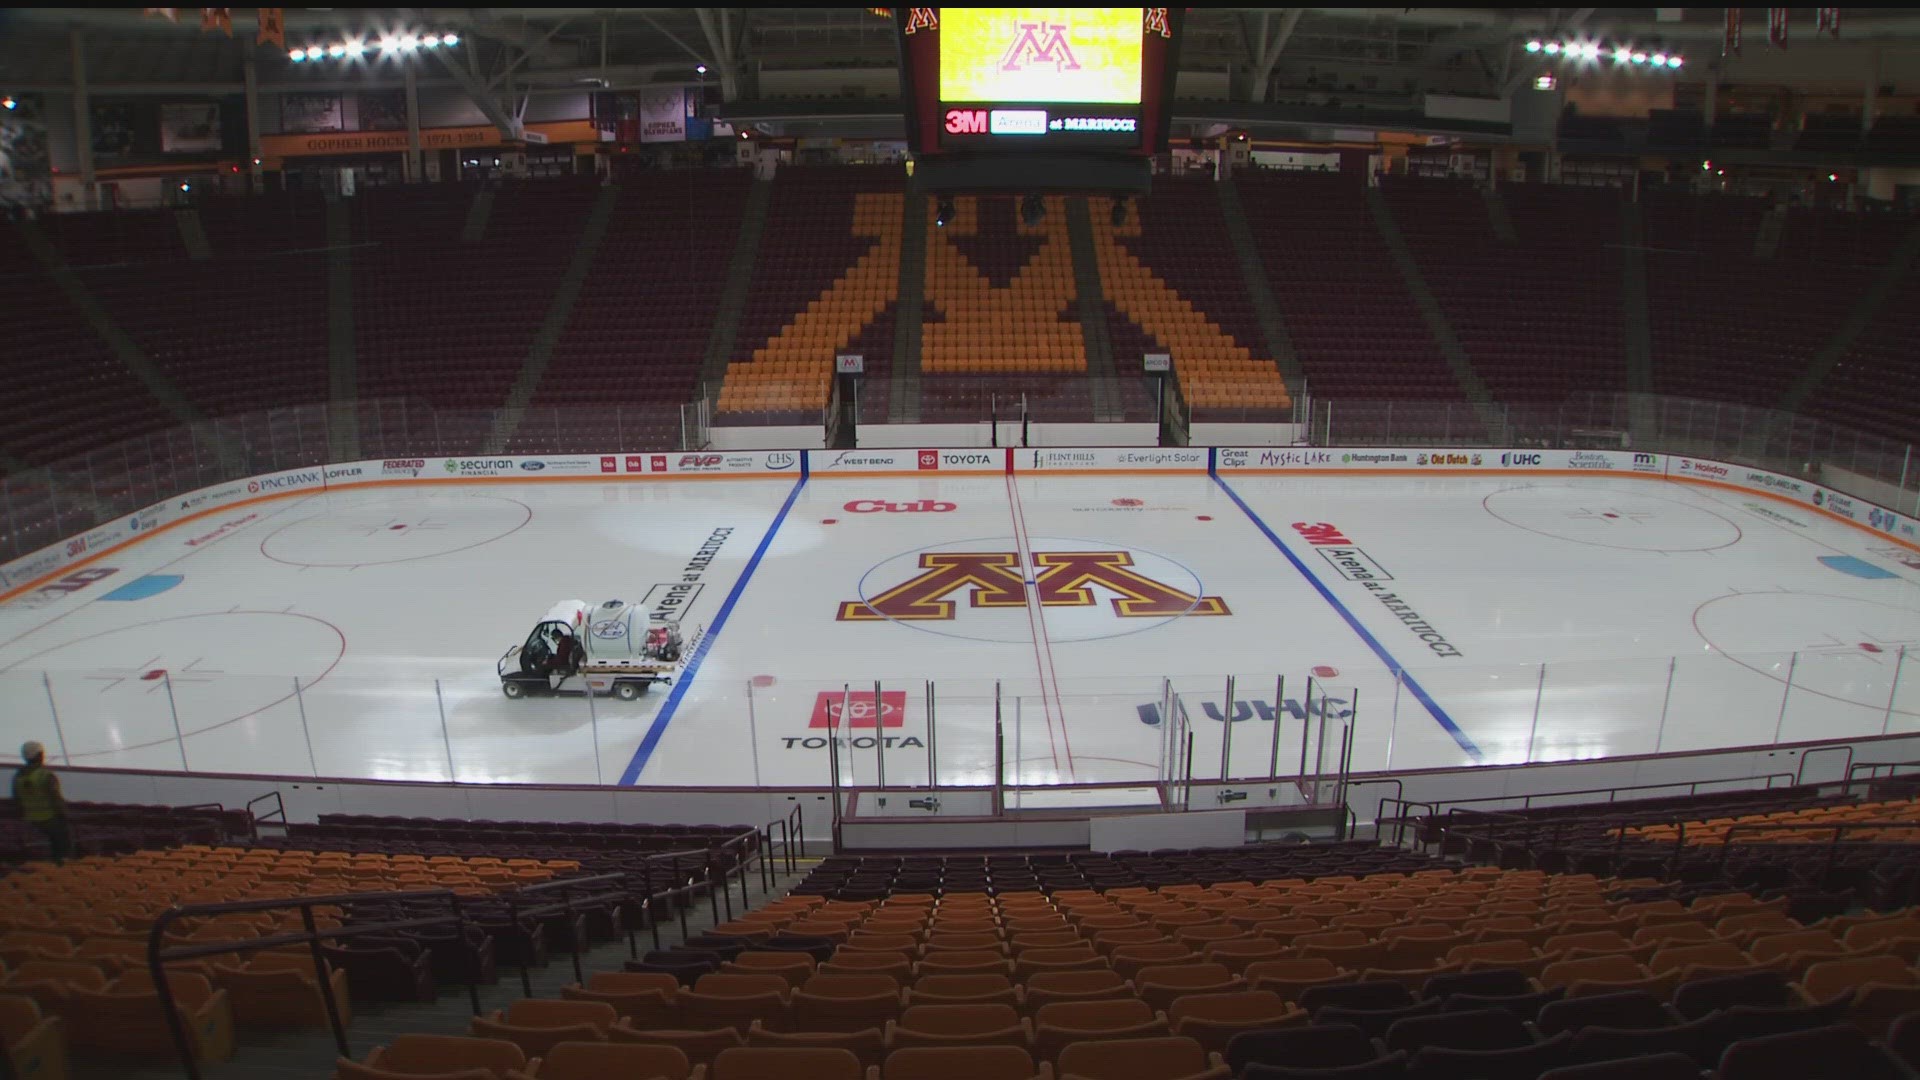 The Gopher men's hockey team will first practice on the ice Sept. 29 ahead of their season starting Oct. 8.